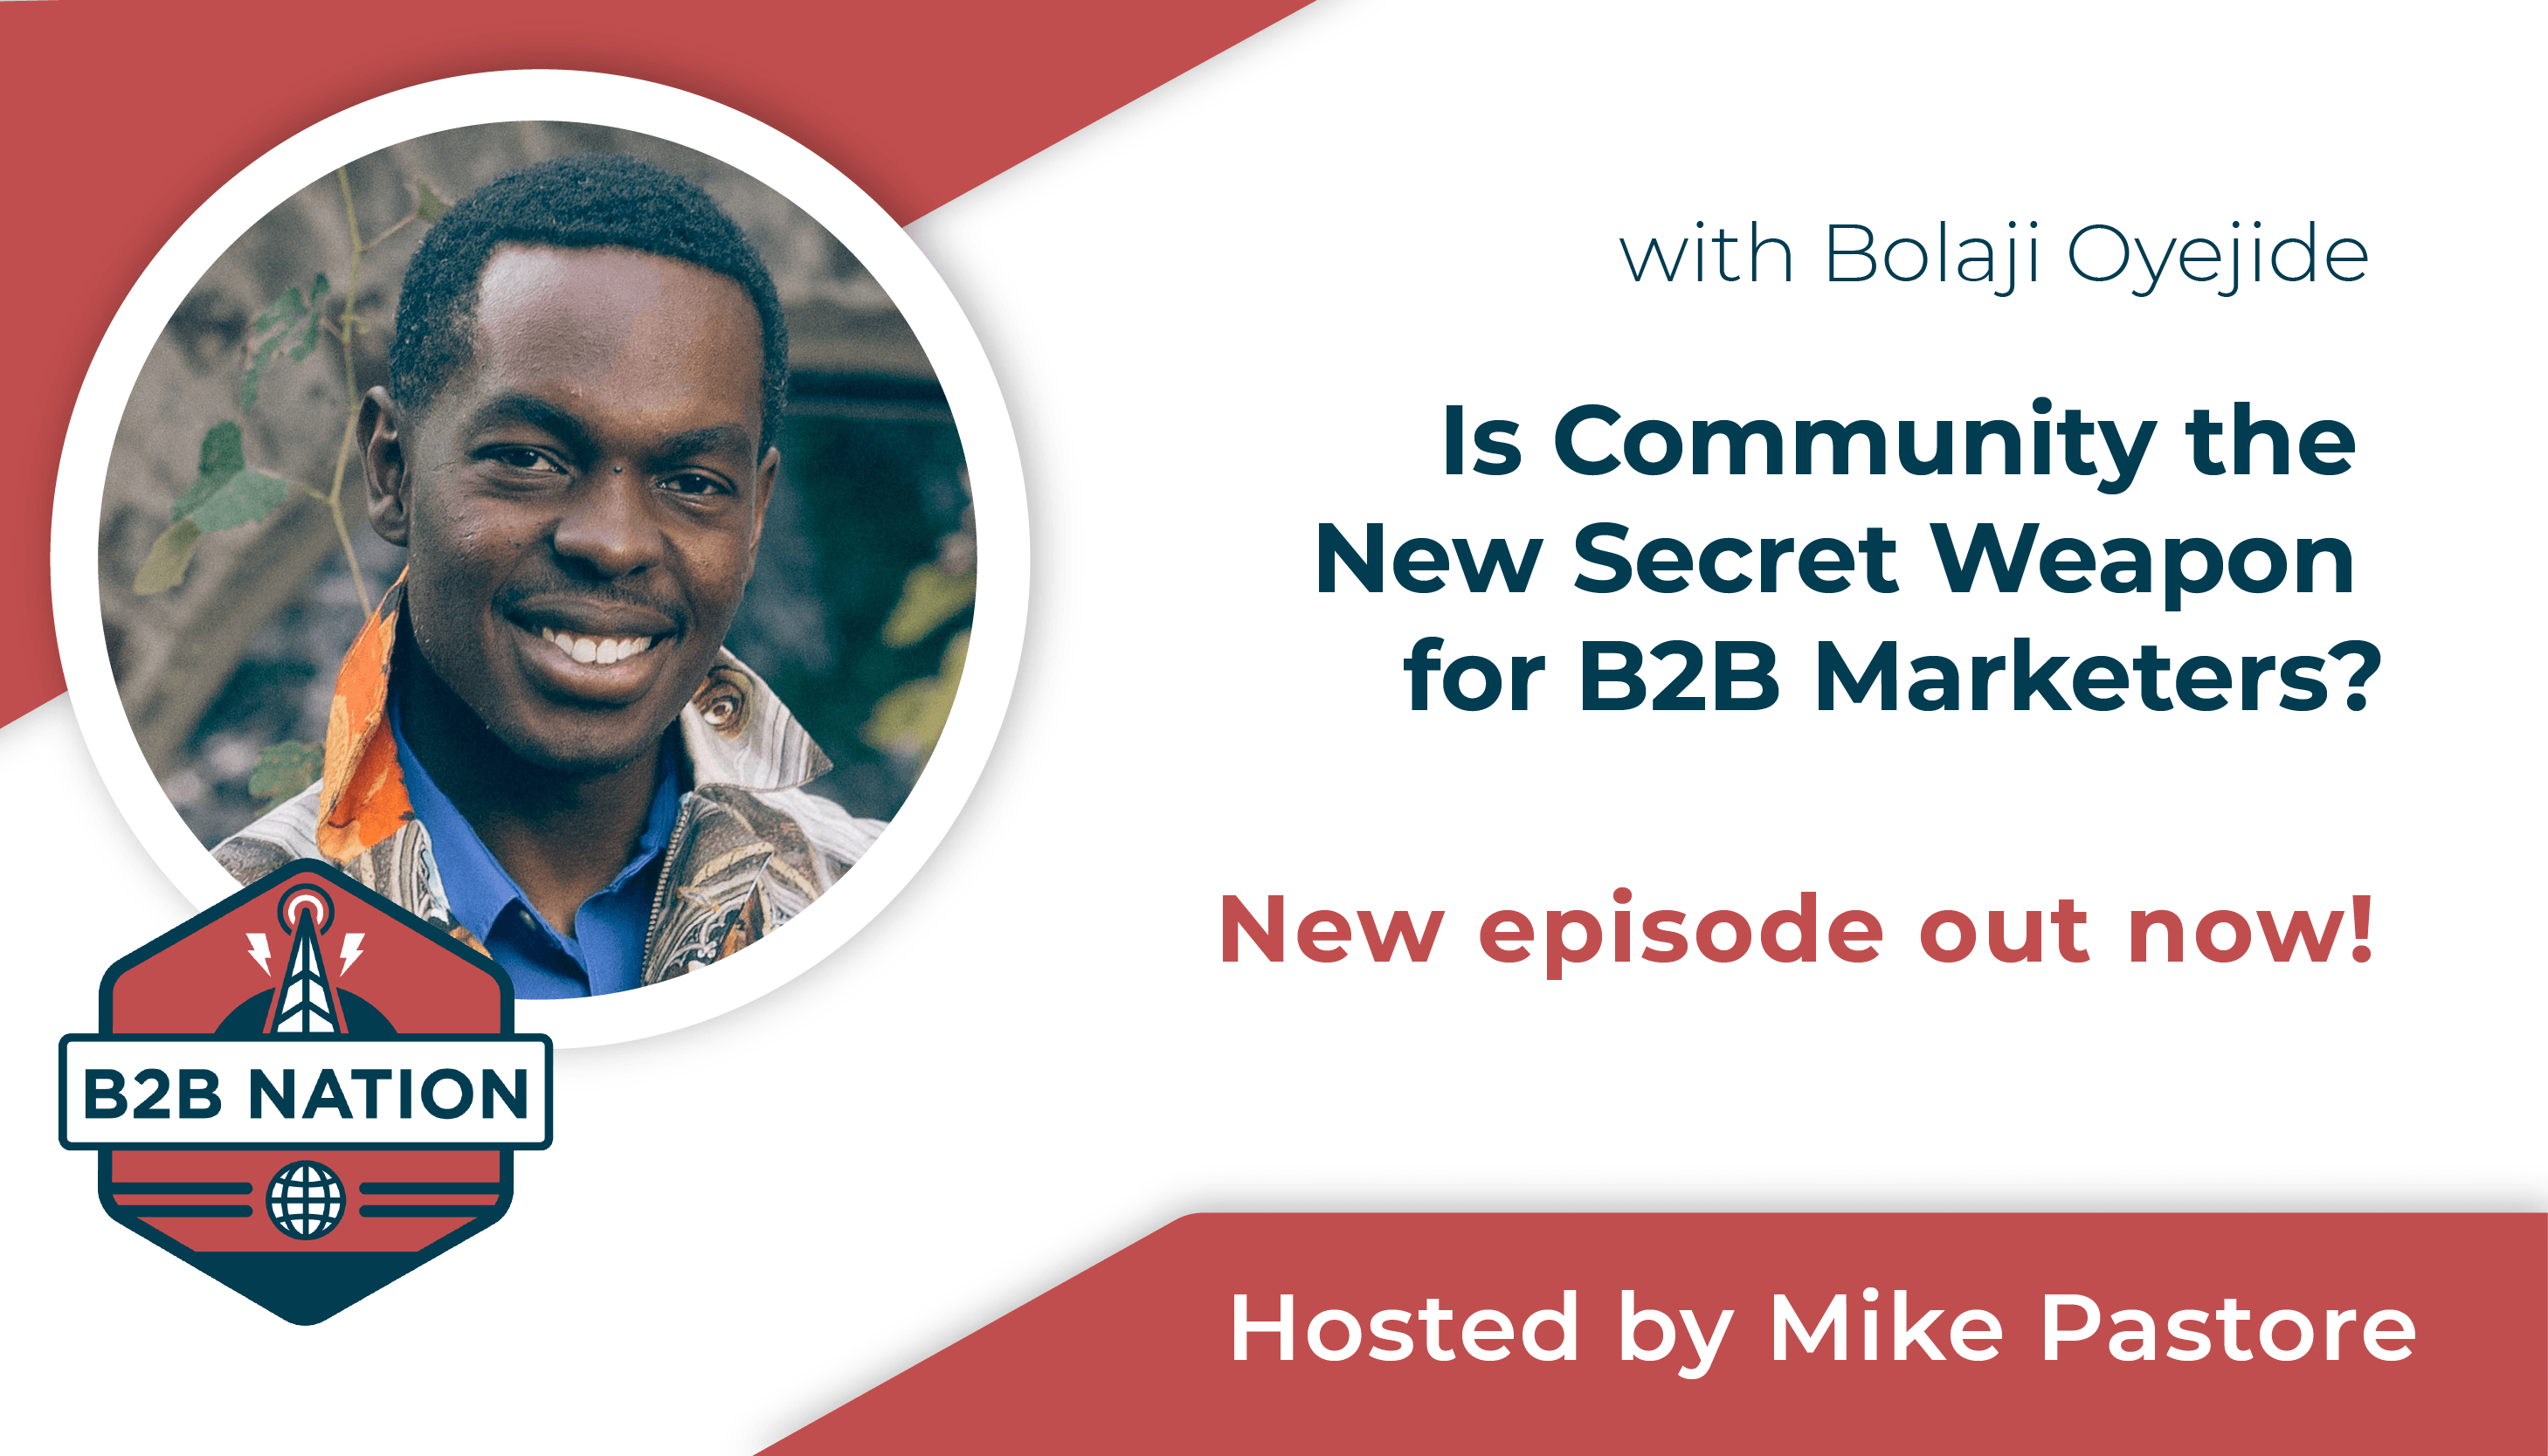 Bolaji Oyejide discusses community as a marketing tactic on B2B Nation.